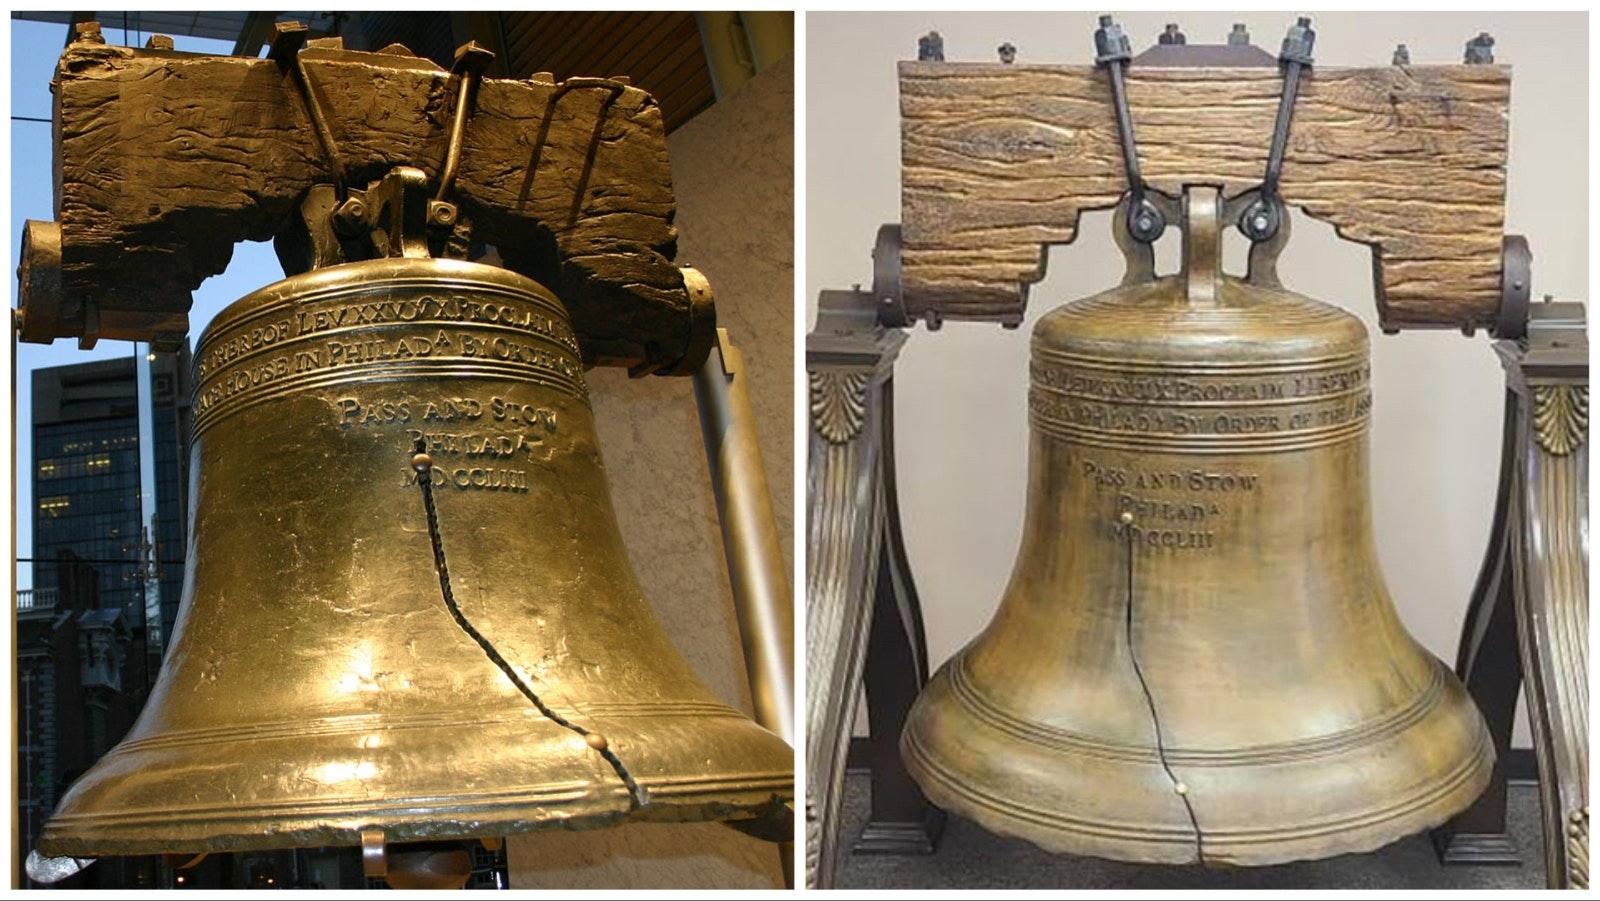 At left, the real Liberty Bell in front of Independence Hall in Philadelphia, Pennsylvania, and at right, the replica in the lobby of Excel Inc. in Mills, Wyoming.